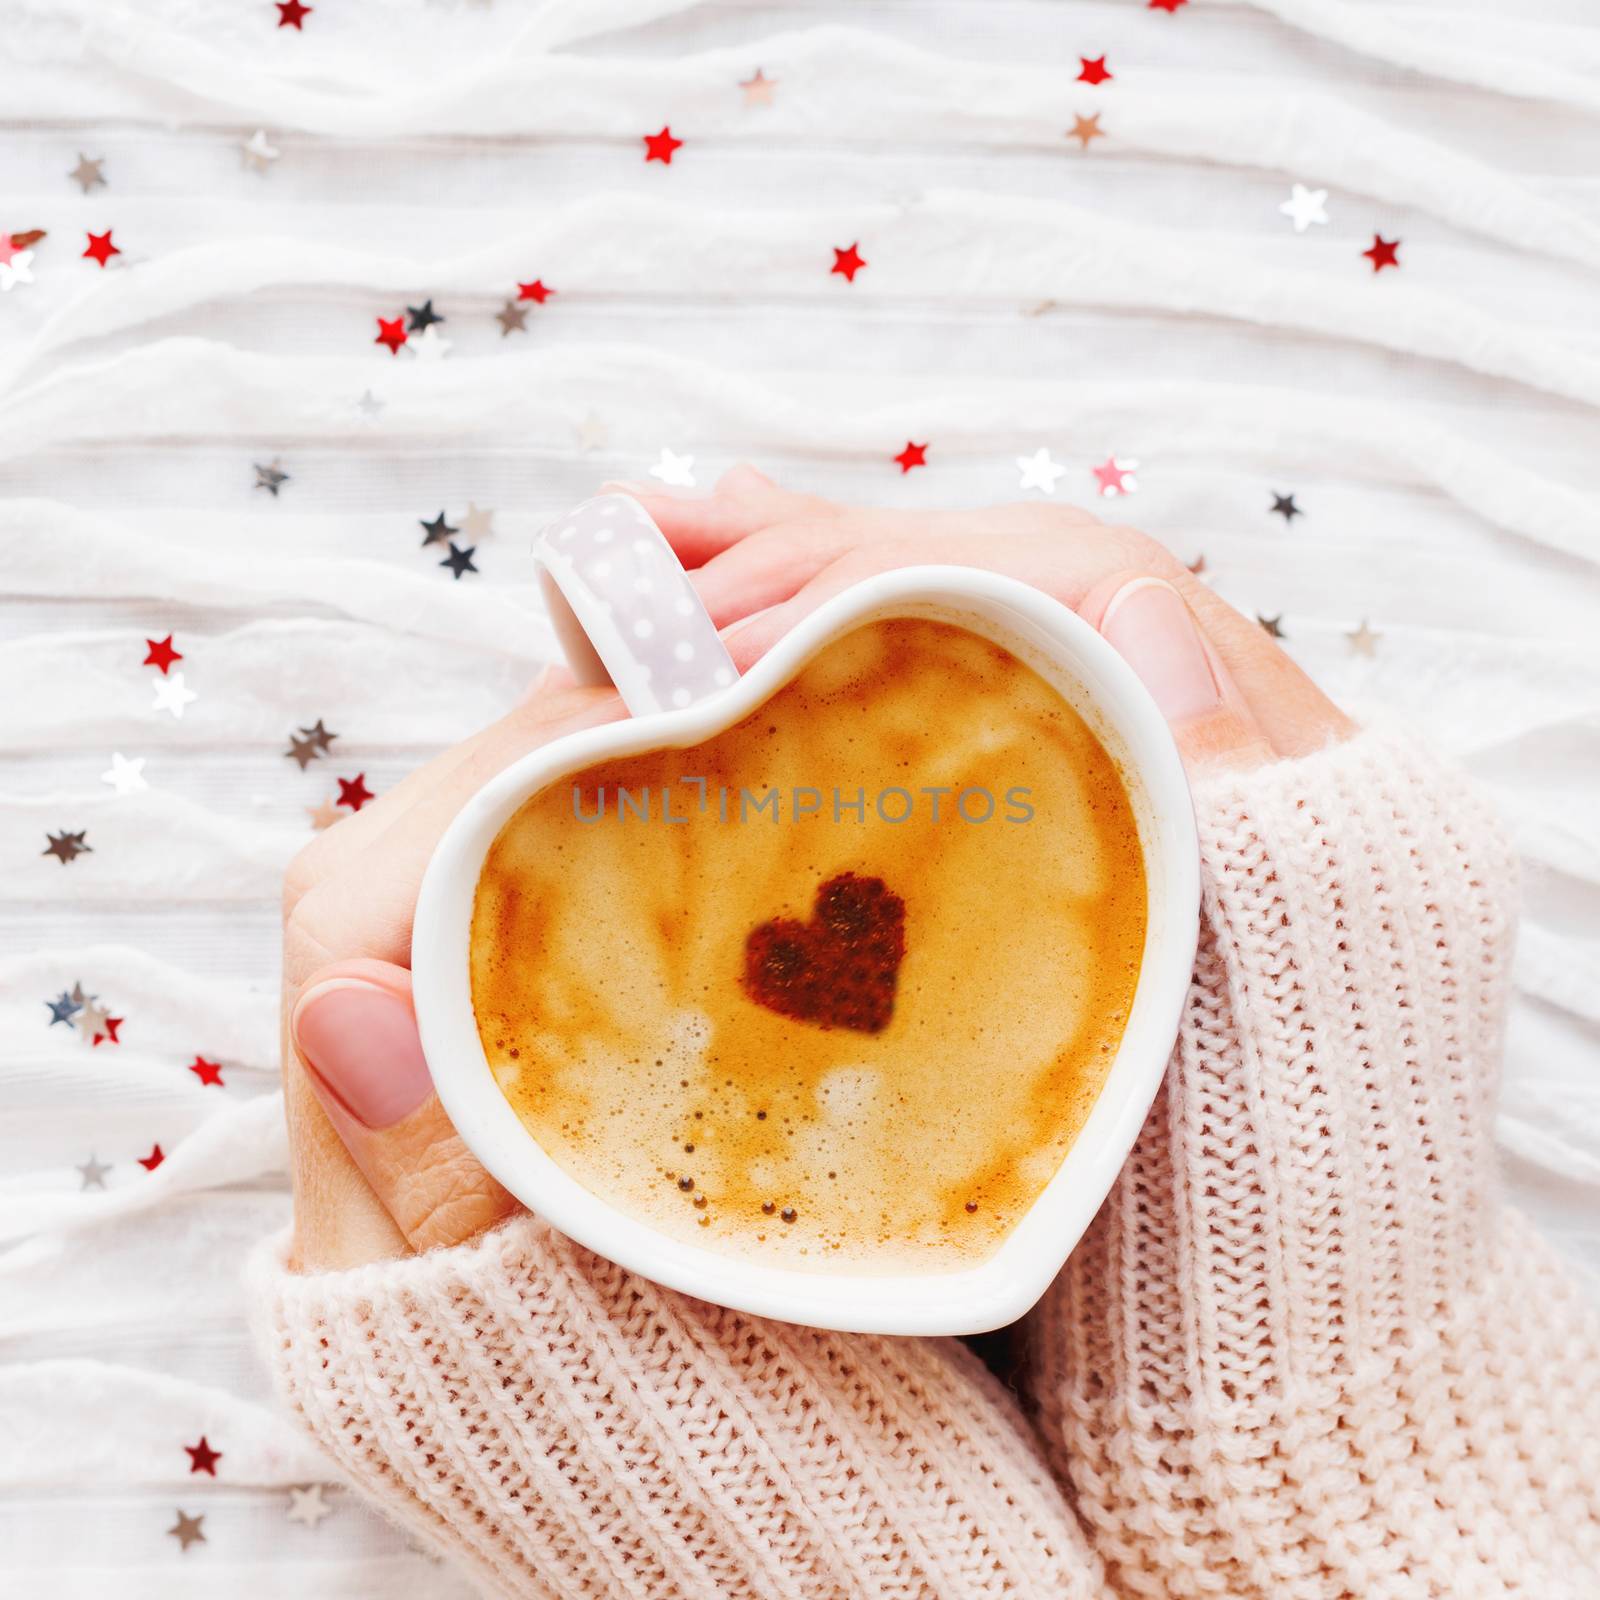 Woman holds a cup of hot coffee with cinnamon heart. Winter and Valentine's Day fabric background with sparkling silver and red confetti. by aksenovko